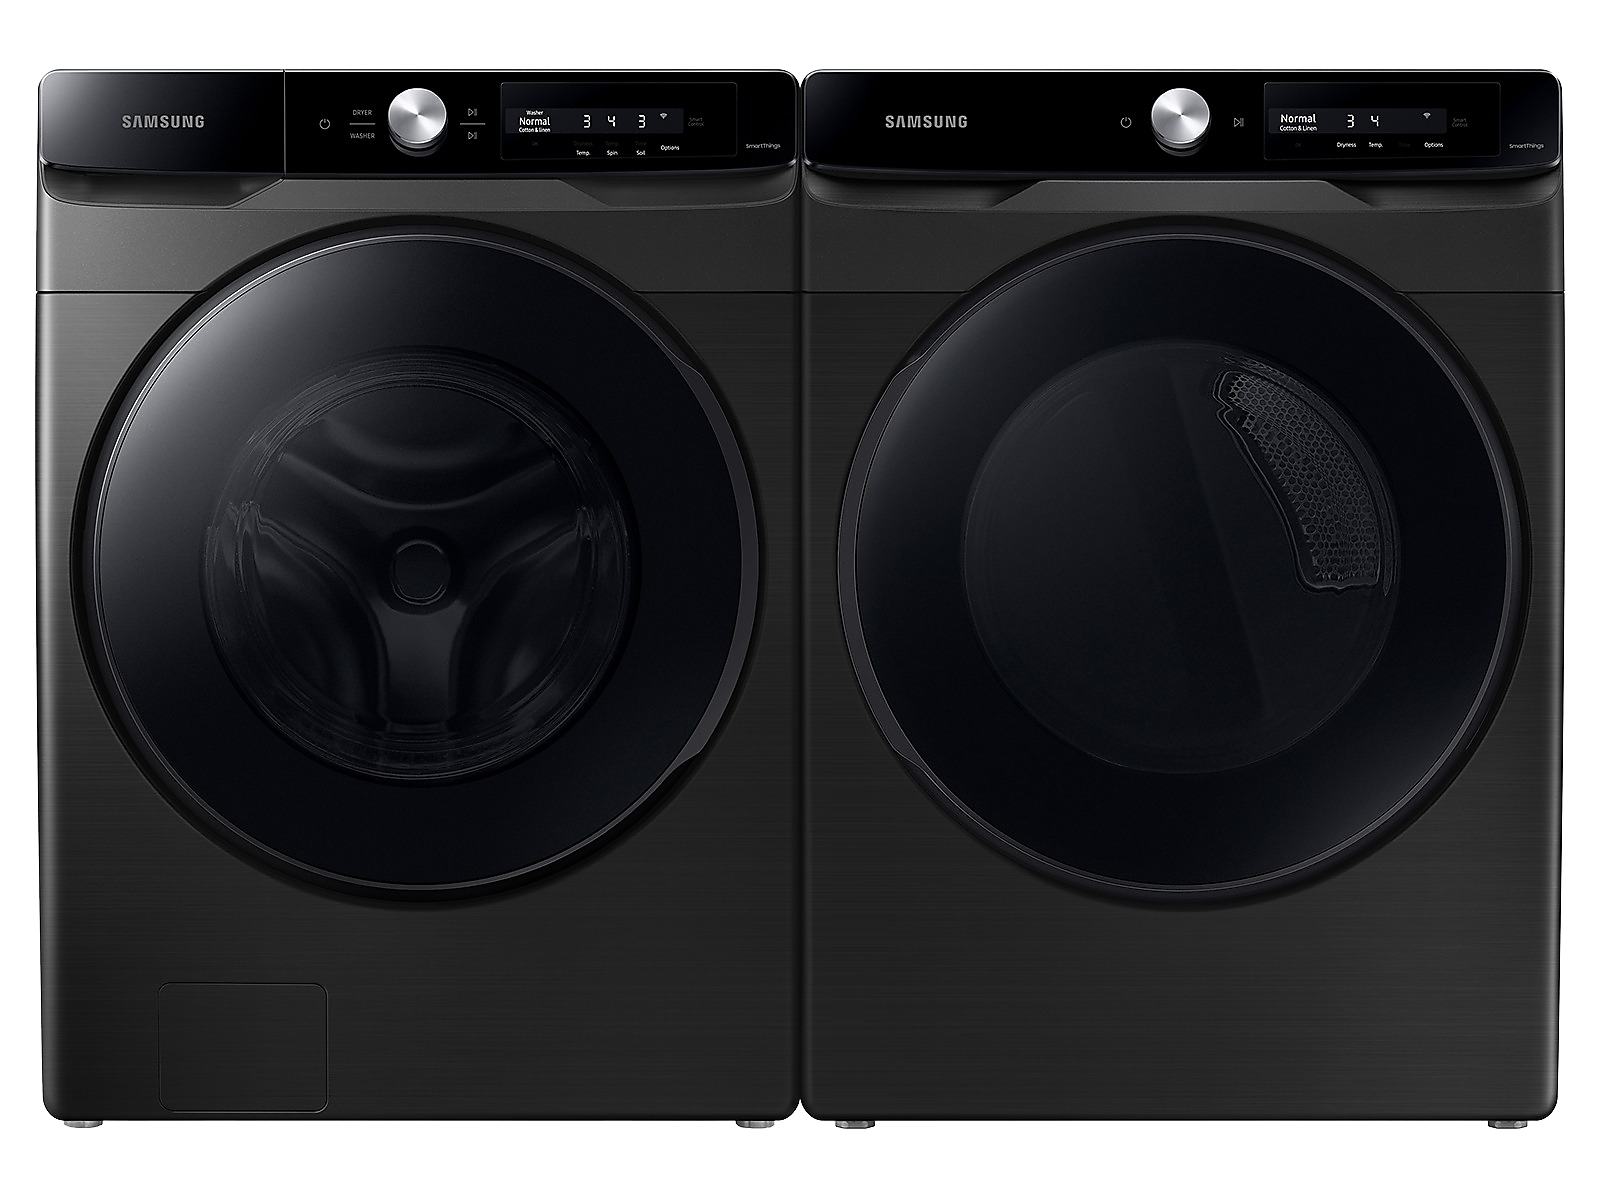 Samsung Smart Dial Front Load Super Speed Wash Washer and Smart Dial Super Speed Dry Electric Dryer package in Brushed in Black(BNDL-1634855500177) photo